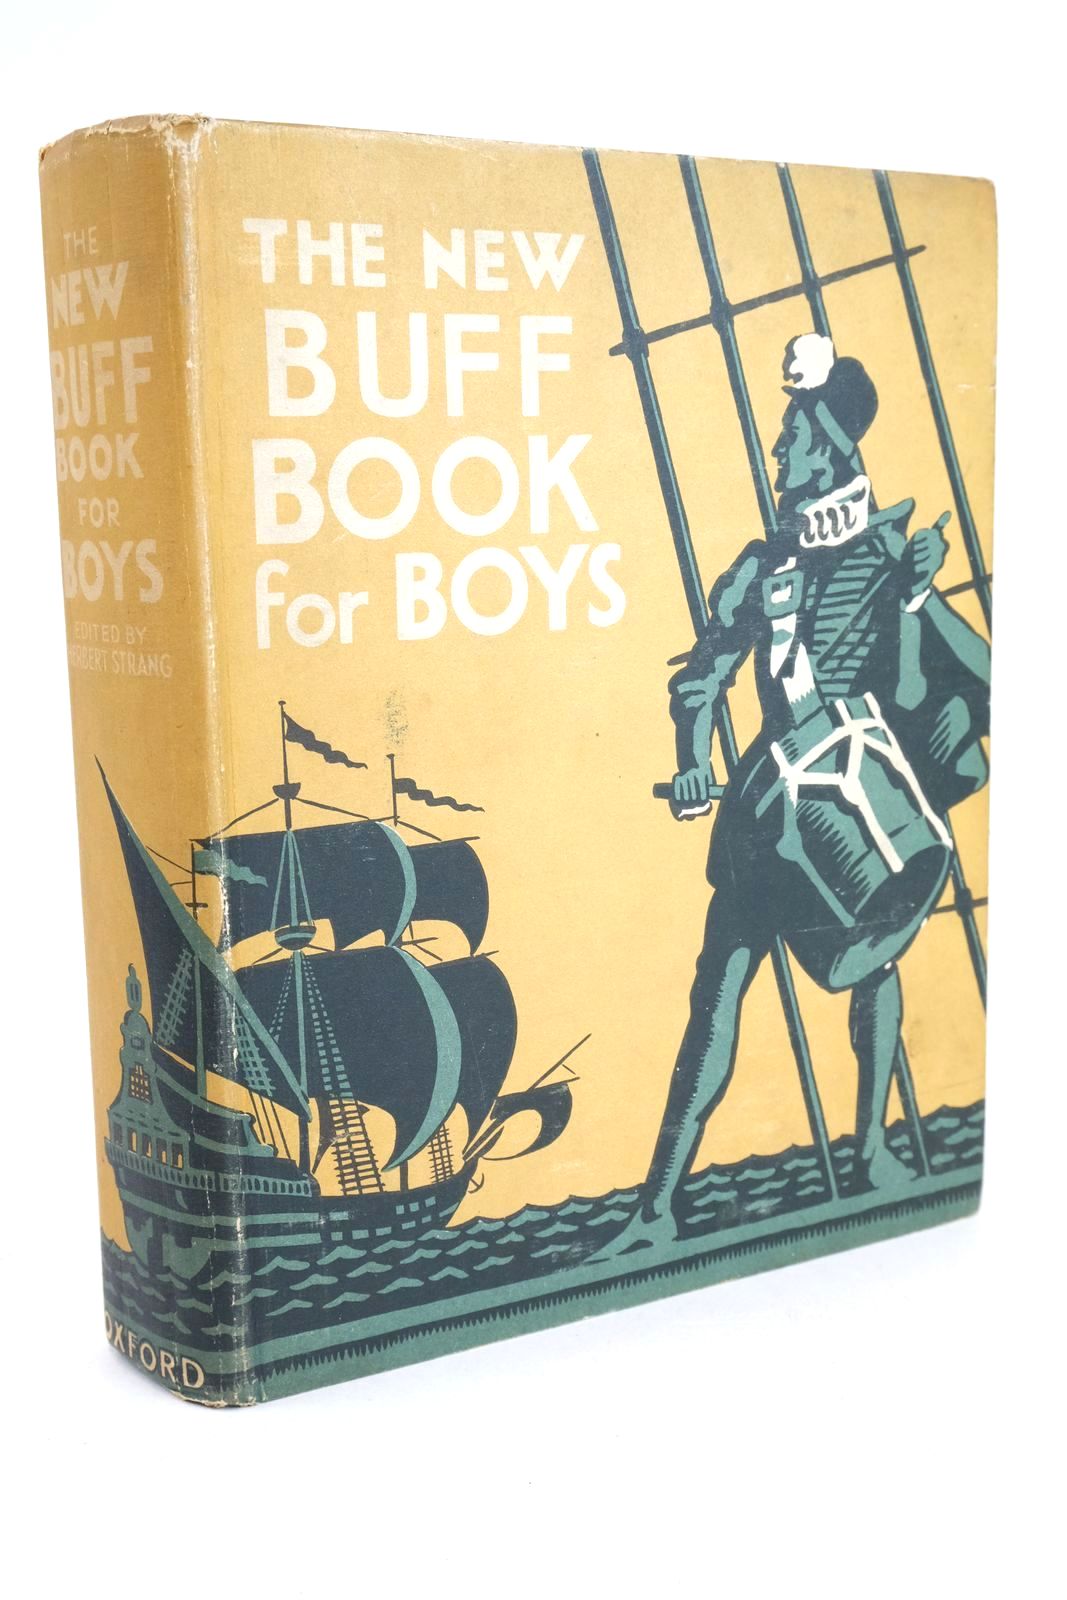 Photo of THE NEW BUFF BOOK FOR BOYS written by Strang, Herbert Banstead, Hugh Hadath, Gunby Havilton, Jeffrey et al,  illustrated by Brock, C.E. Brock, H.M. et al.,  published by Oxford University Press, Humphrey Milford (STOCK CODE: 1325451)  for sale by Stella & Rose's Books